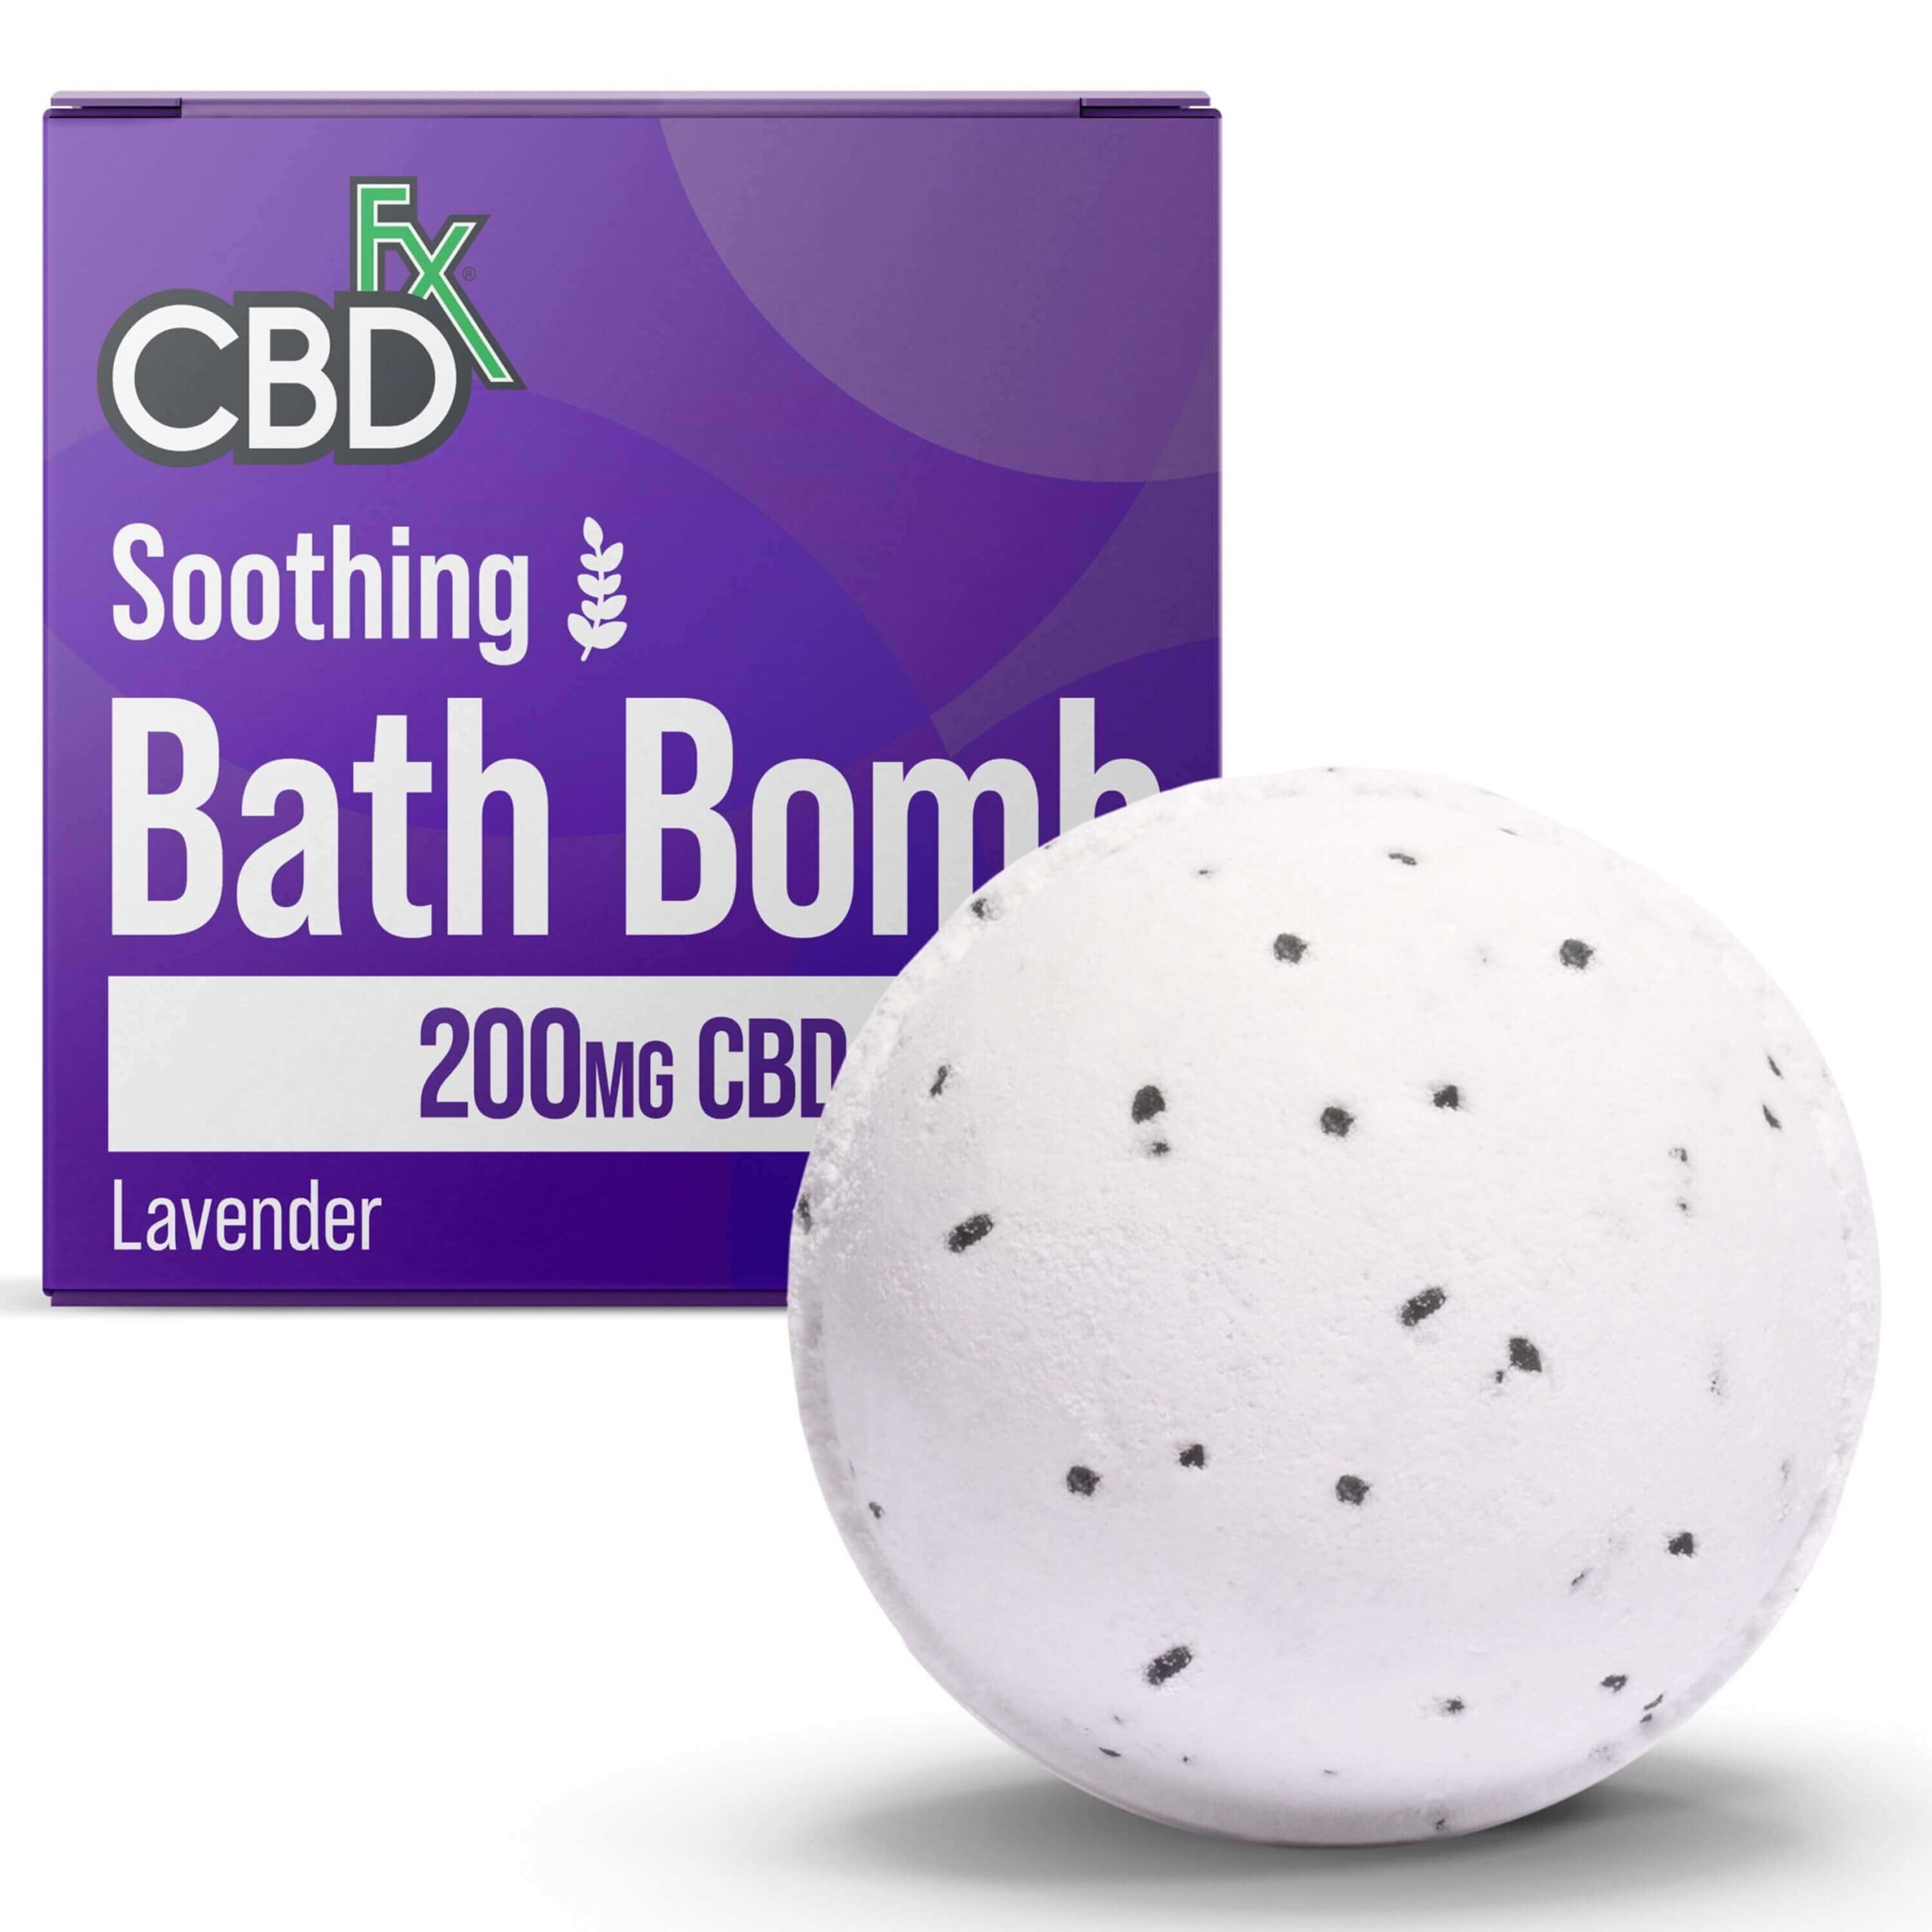 Topical category Bath Bomb